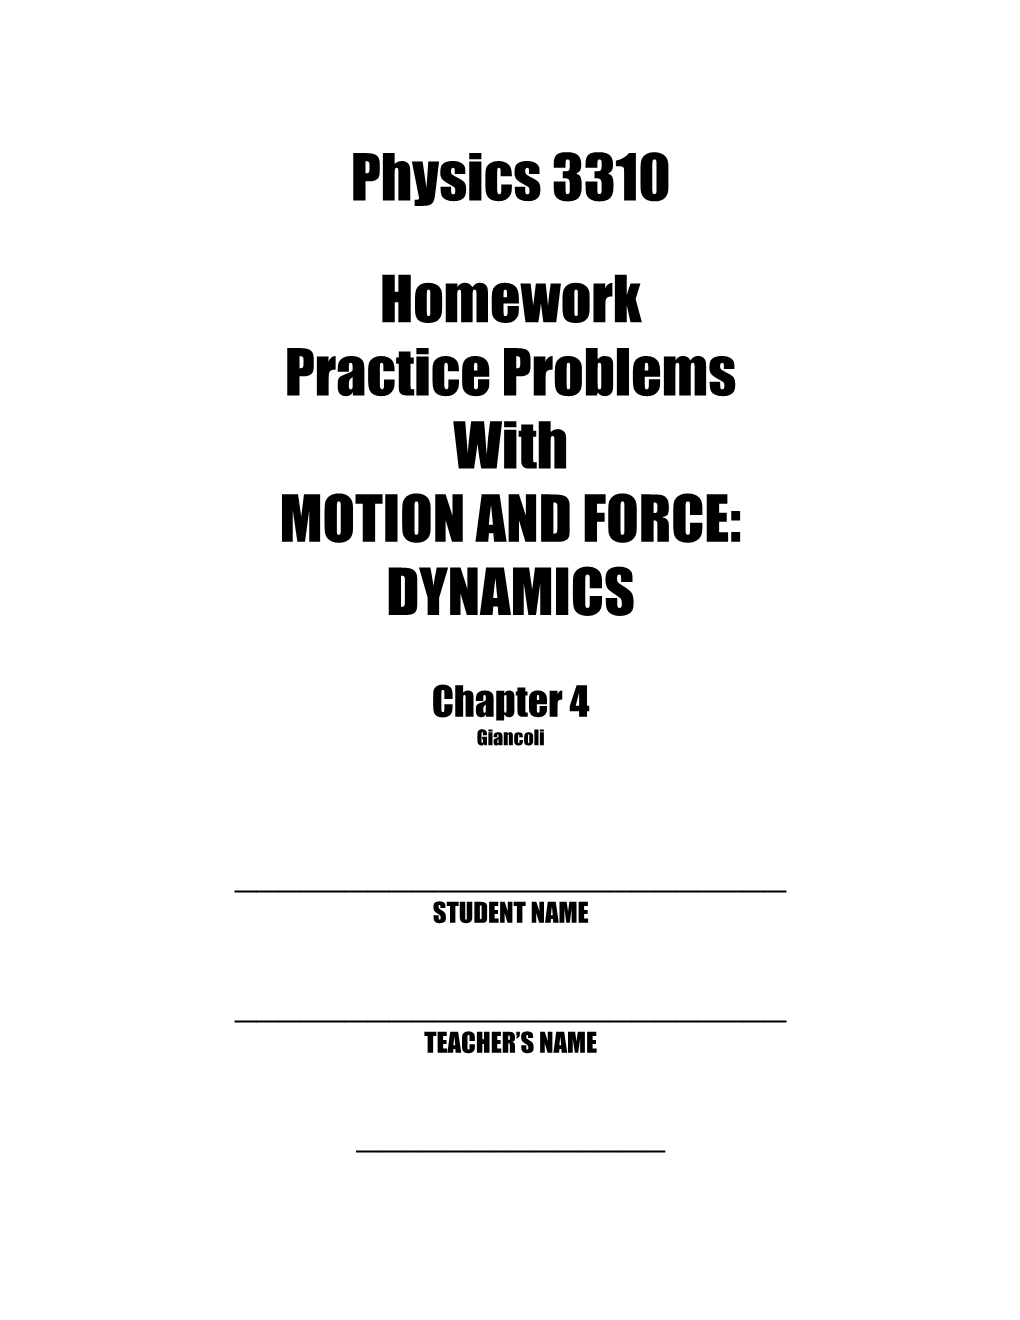 Motion and Force: Dynamics